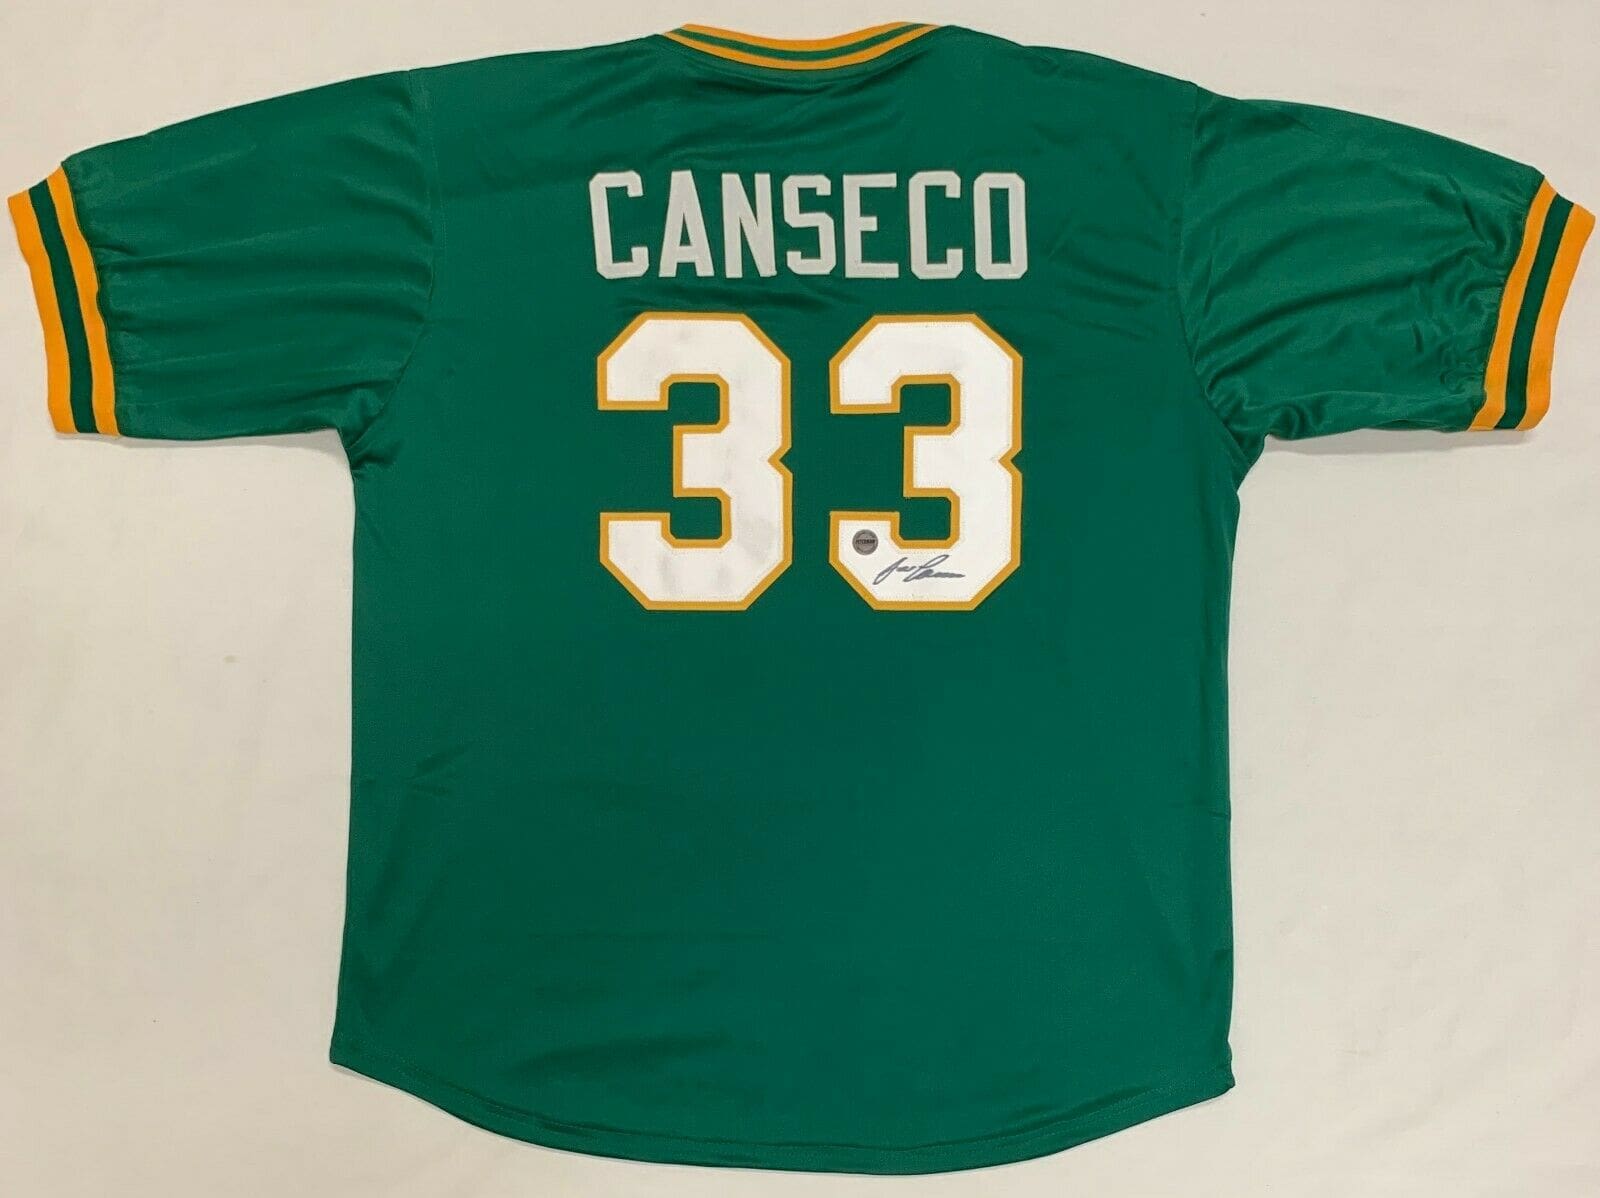 Jose Canseco Signed Autographed Green Jersey FSG Authenticated Juiced